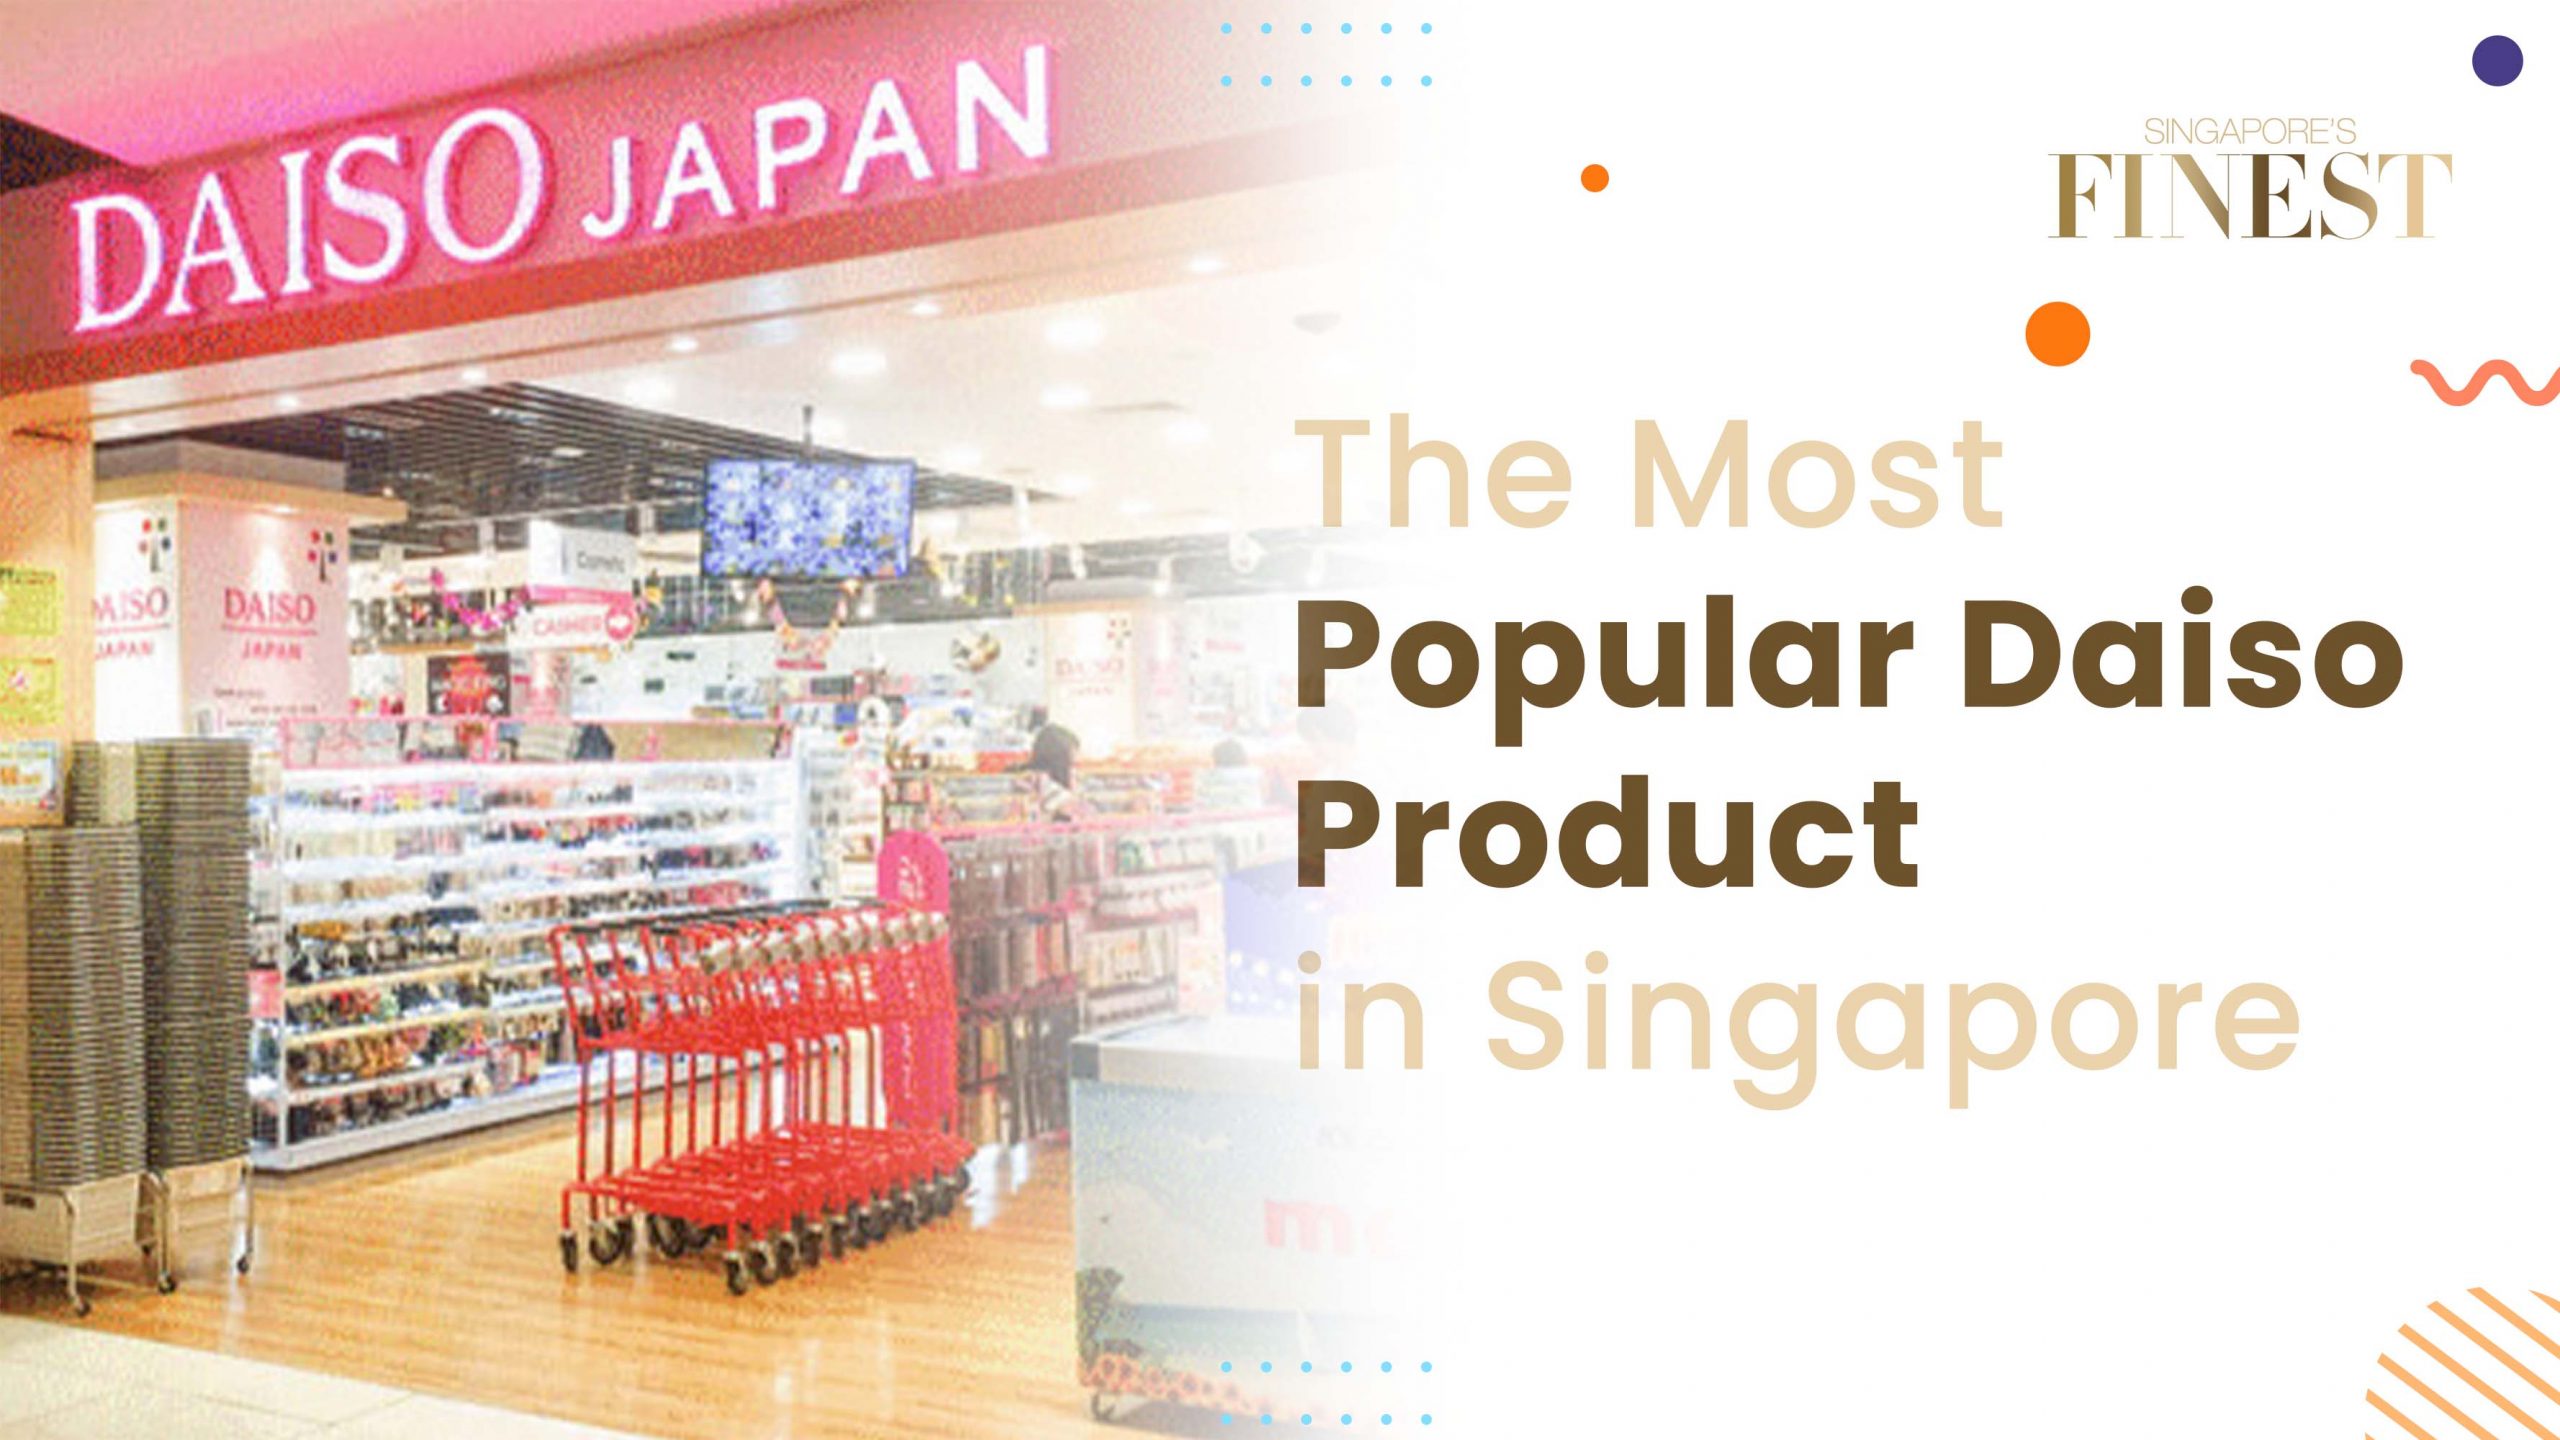 The Most Popular Daiso Product in Singapore